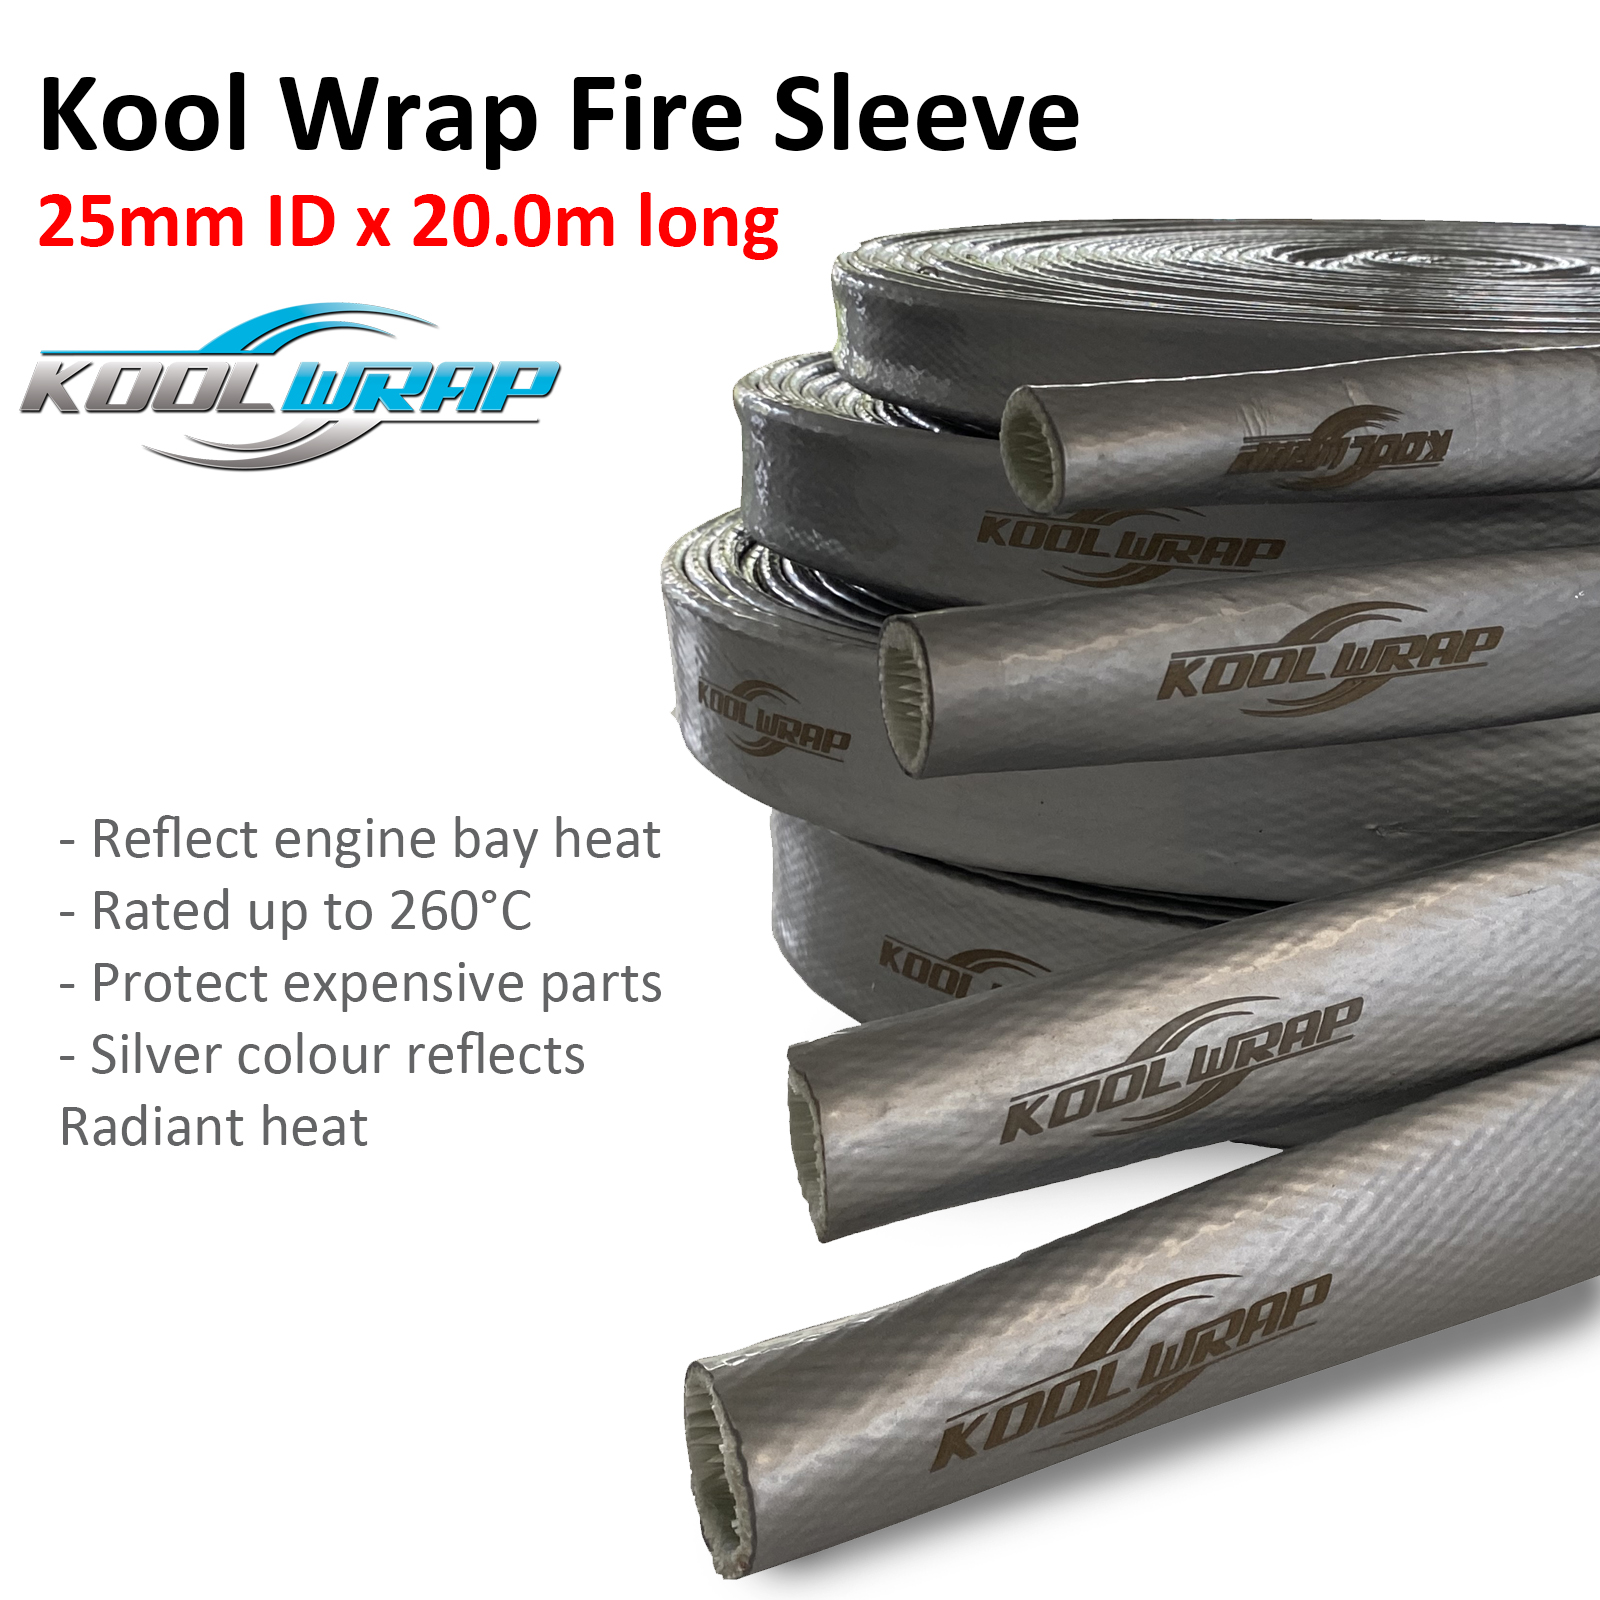 Kool Wrap Silicone Coated Heat Resistant Fire Sleeve 25mm x 20mID logo